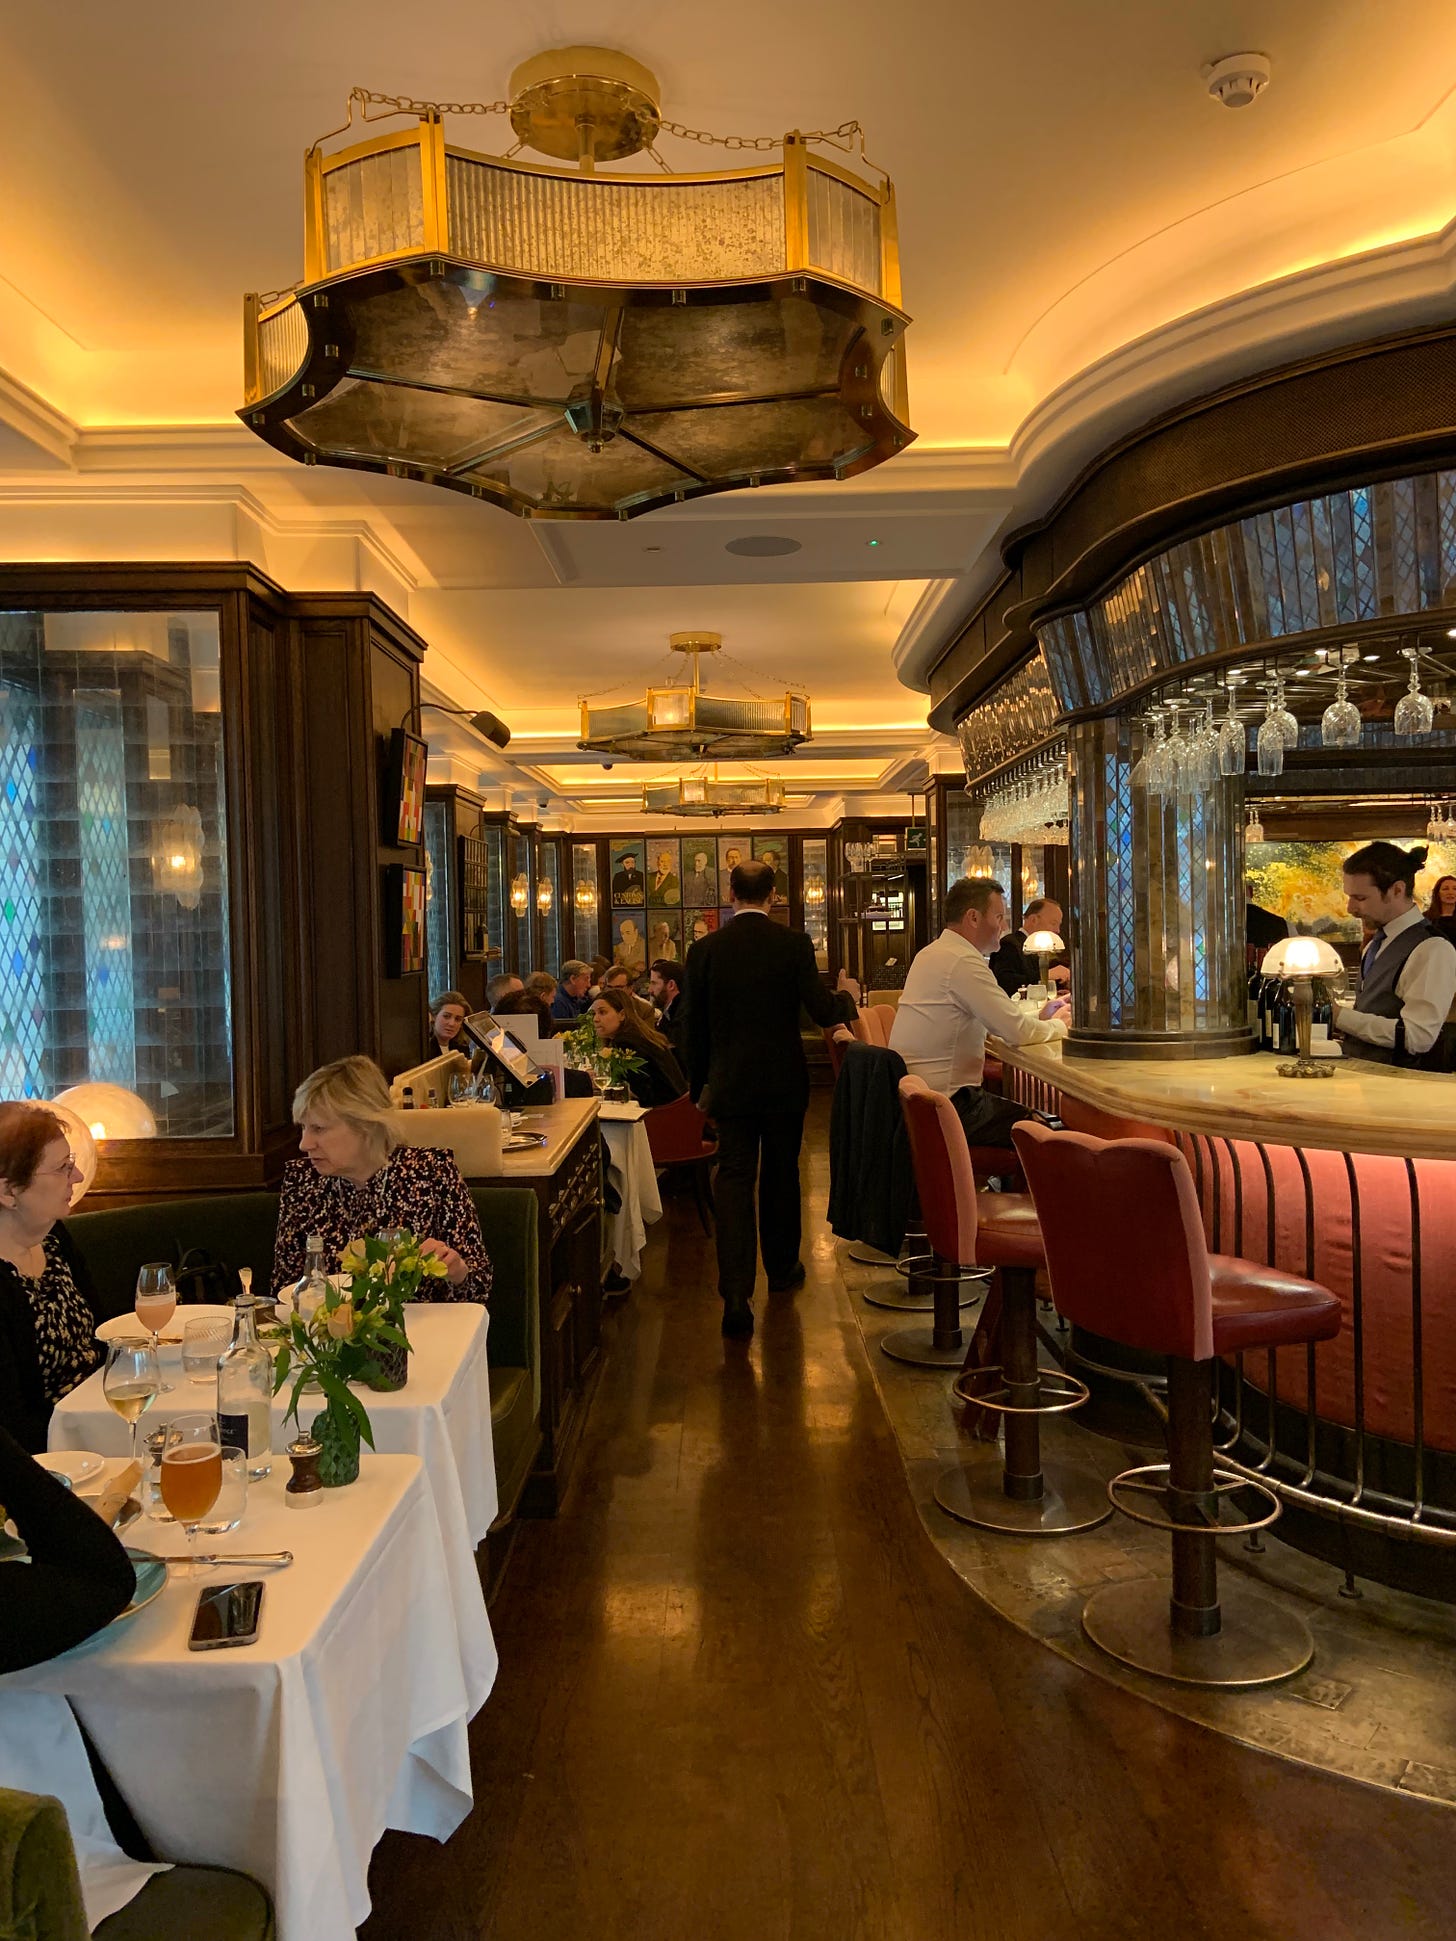 photo of the inside of the Ivy restaurant in London, showing the bar and diners seated at tables